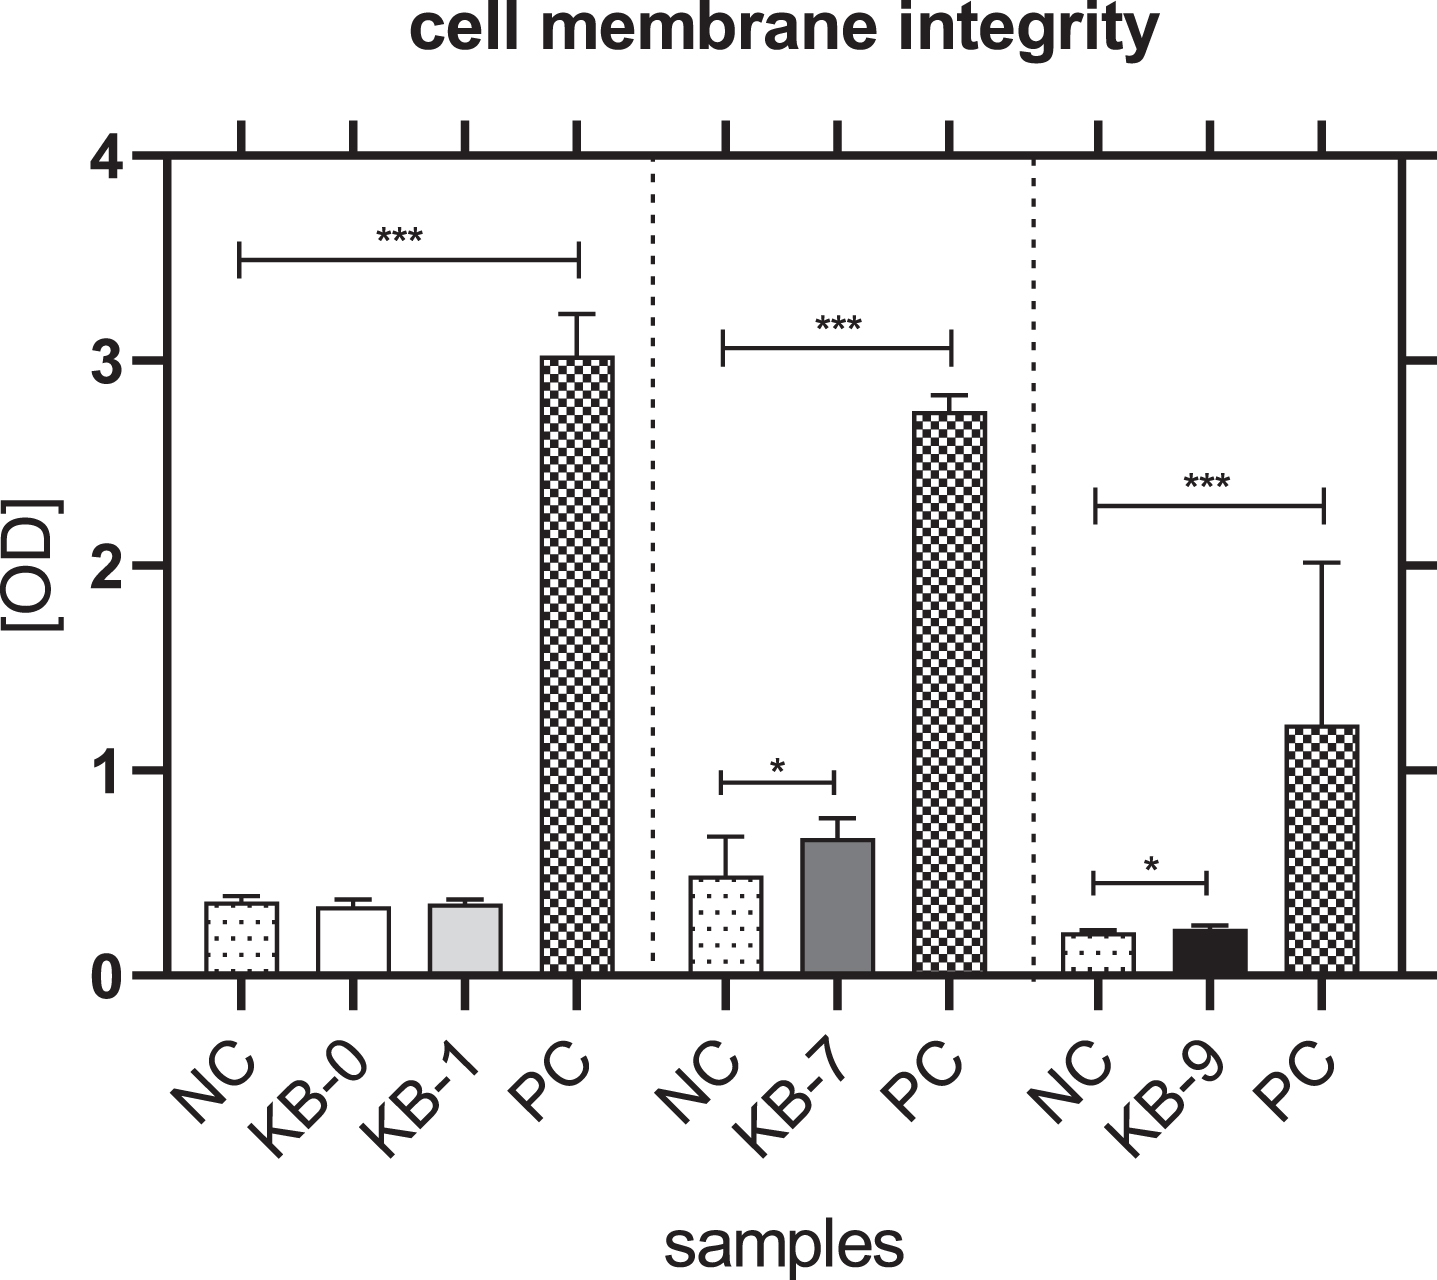 Cell membrane integrity of L929 cells after 48h of eluate incubation with KB-0, KB-1, KB-7 and KB-9 measured in three independent studies. L929 cell cultivated with pure medium (NC) were used as negative control (NC). Cells cultivated in TCP and treated with cell lysis buffer were used as positive control (PC). Presented are arithmetic mean±standard deviation of n = 8 samples. p < 0.05 was considered significant compared to NC. *: p < 0.05; **: p < 0.01, ***: p < 0.001.